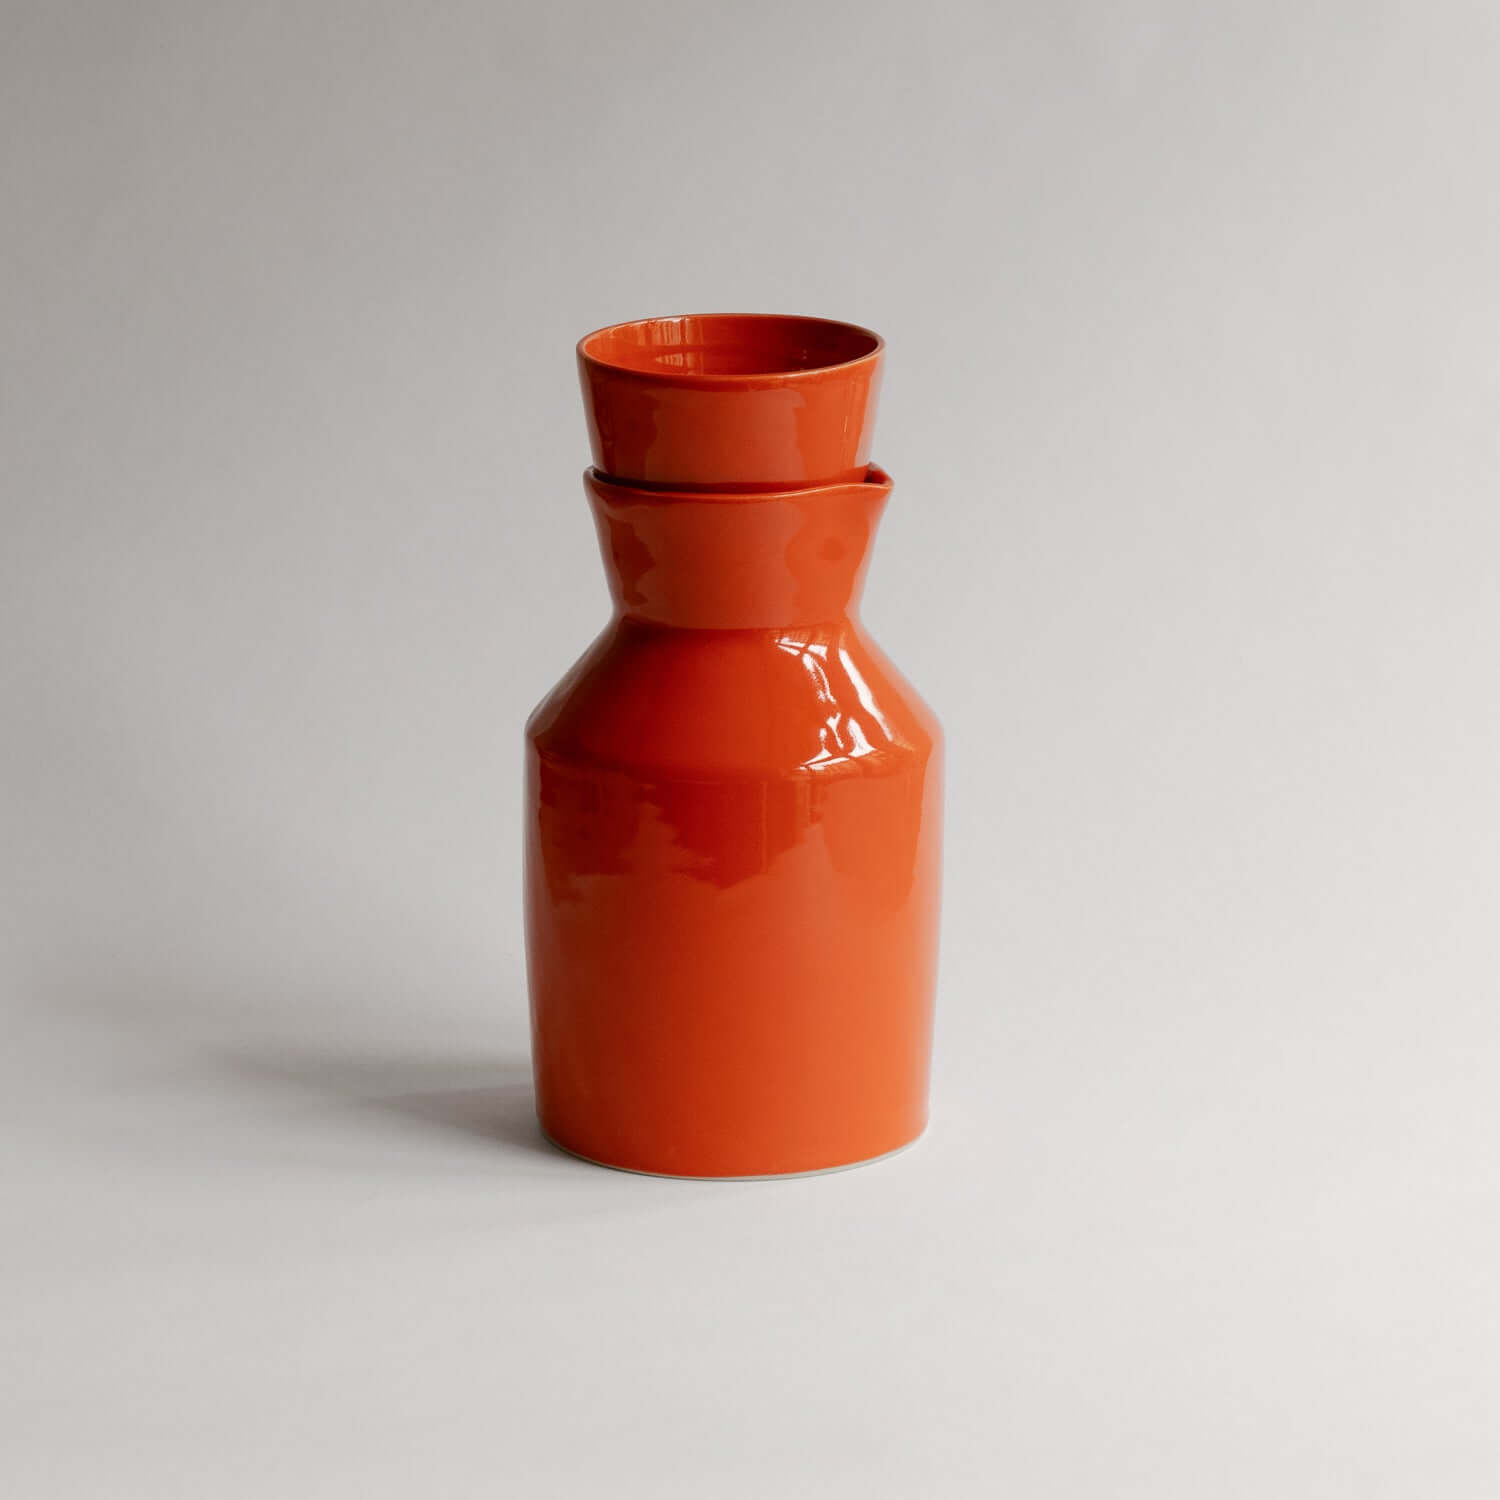 Elevate your daily life with our Tuva Pitcher. Perfect as a vase, a pitcher or simply decor. It holds 1L, with a beautiful red glaze inside. Handmade with love. von viola beuscher ceramics